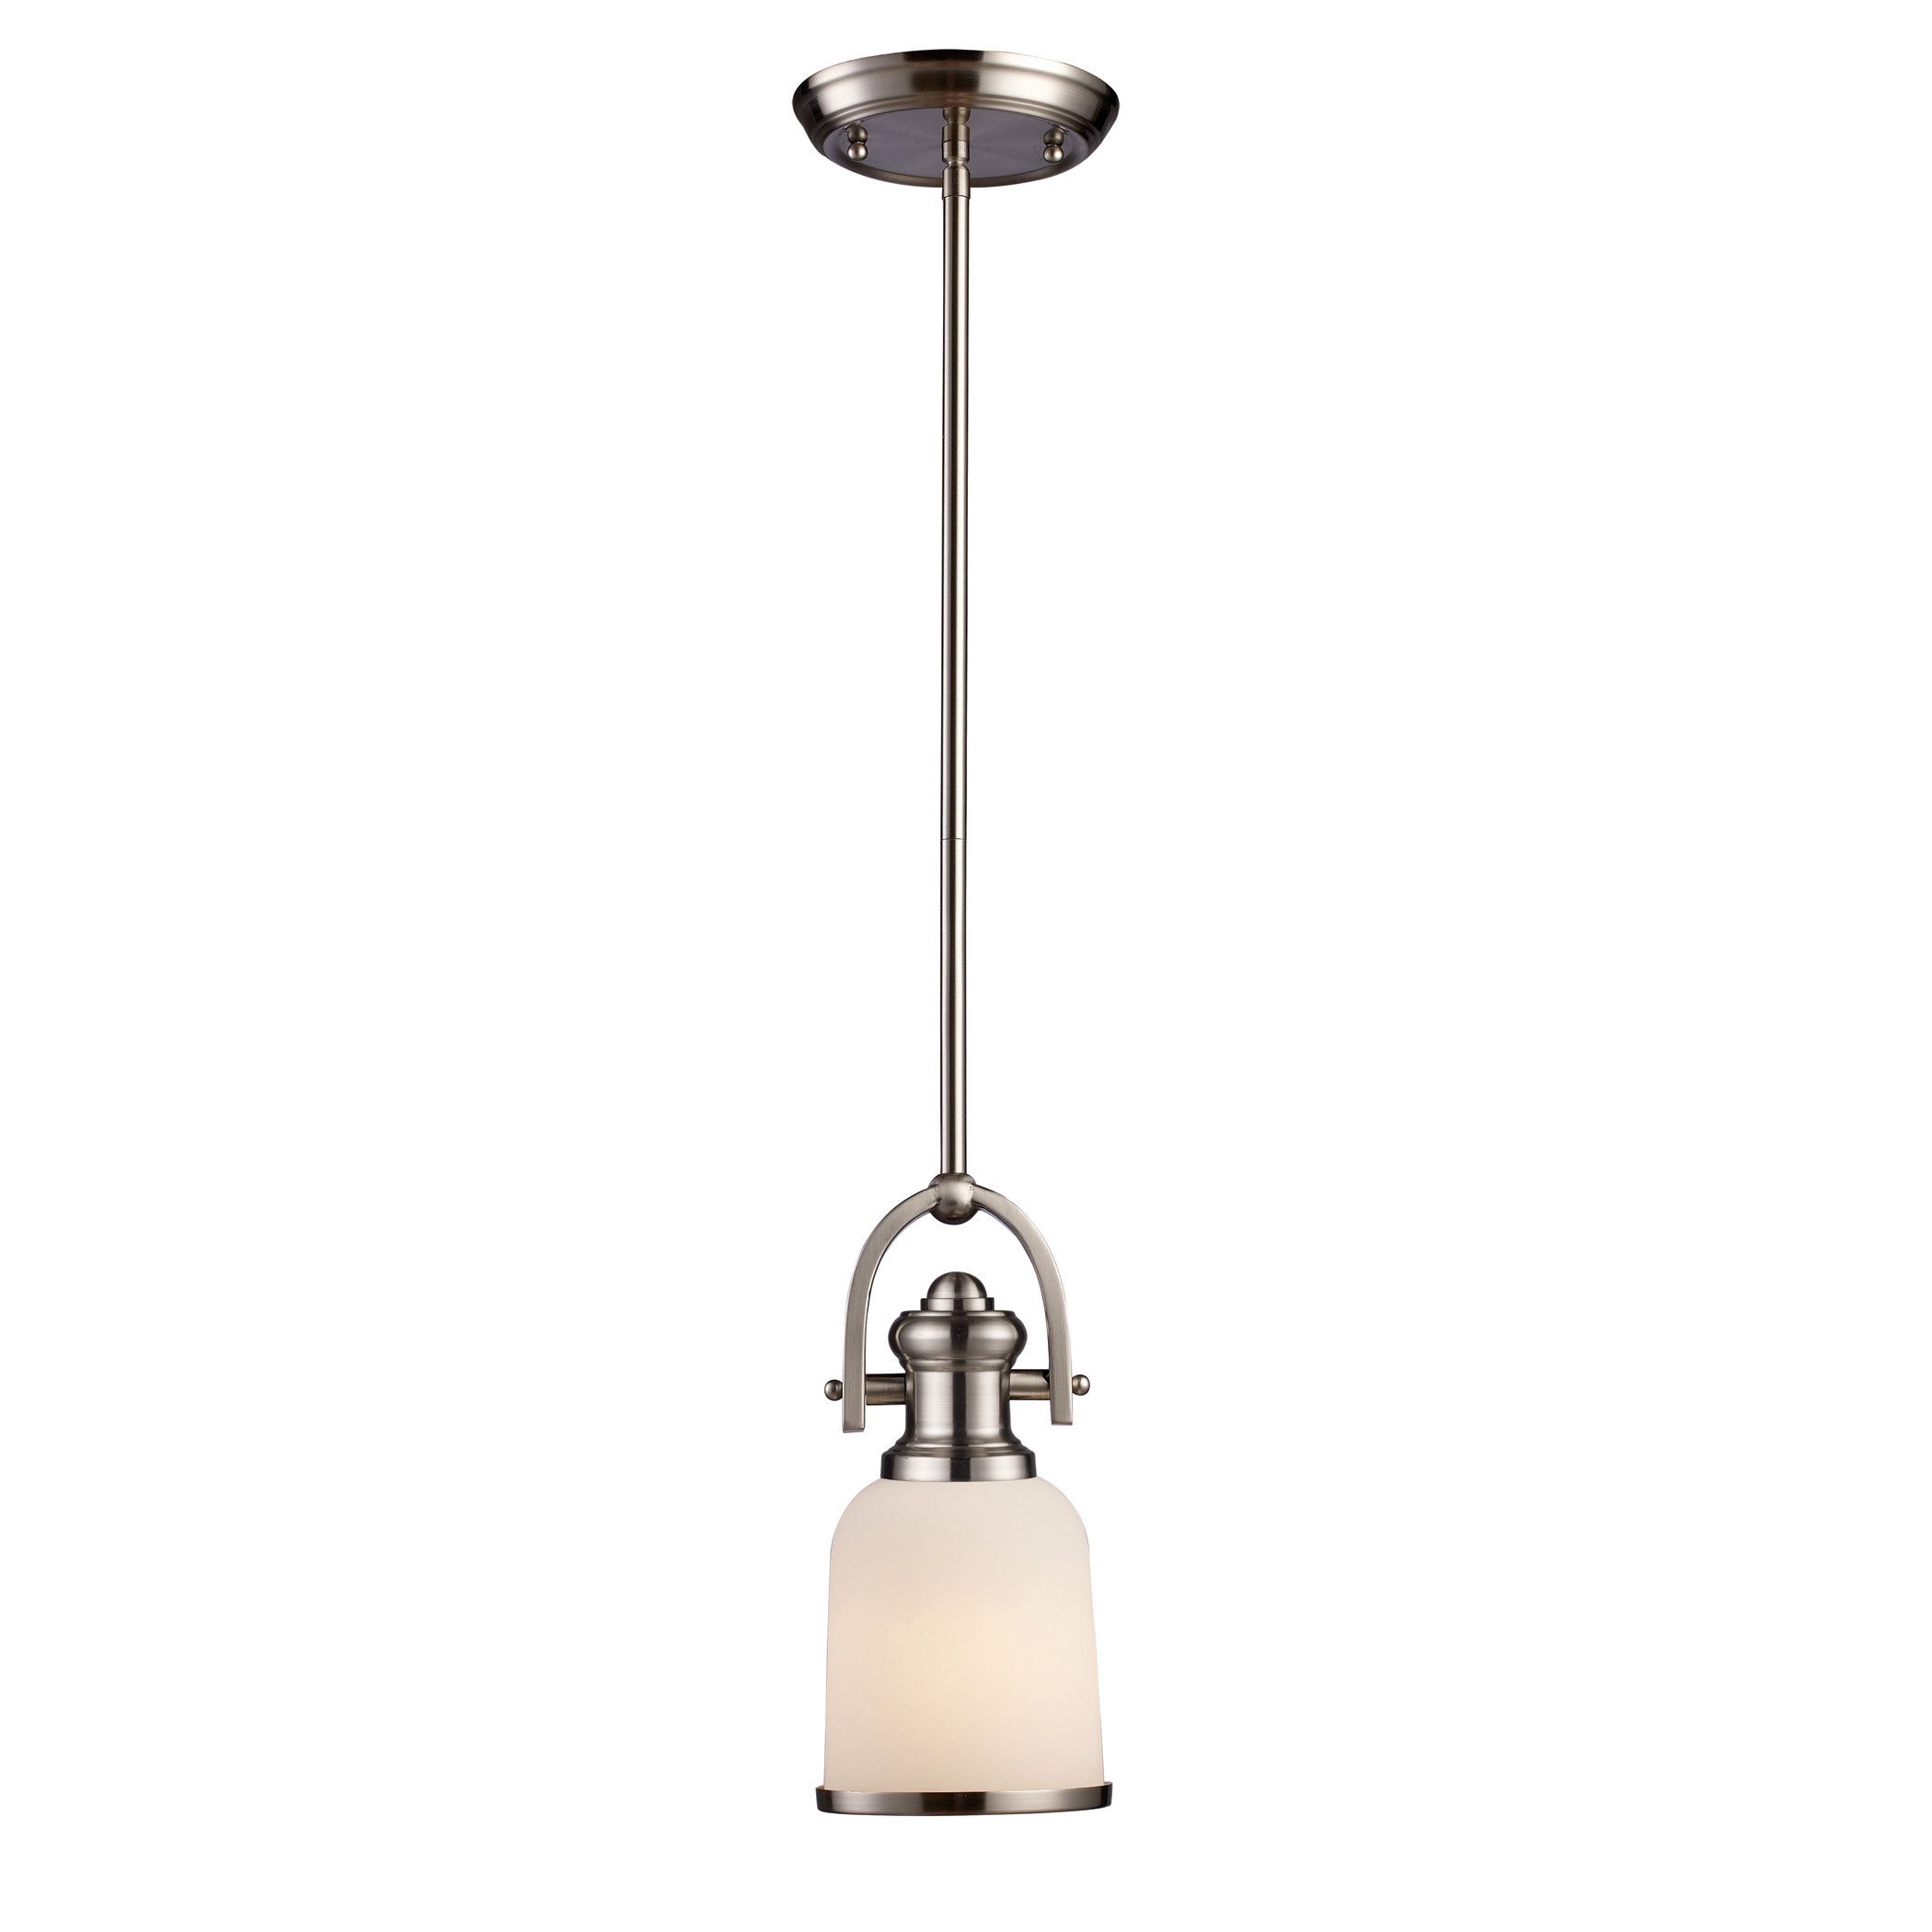 Boornazian 1 Light Cone Pendant Throughout Grullon Scroll 1 Light Single Bell Pendants (View 17 of 30)